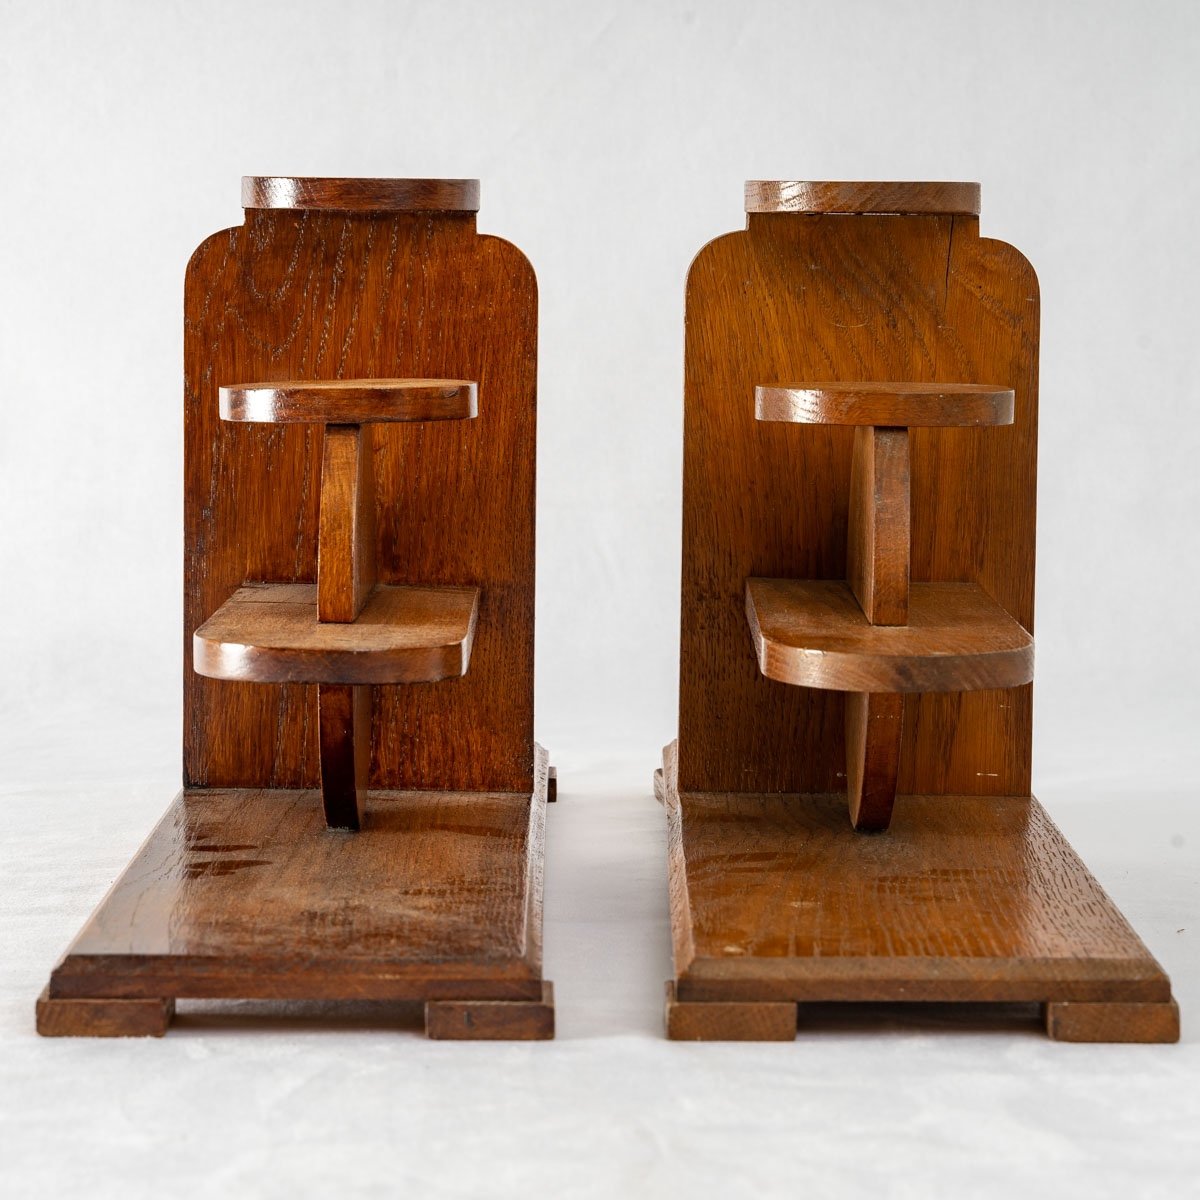 Pair Of Brutalist Shelves - Attributed To Audoux-minet - Varnished Oak - XXth Century-photo-4